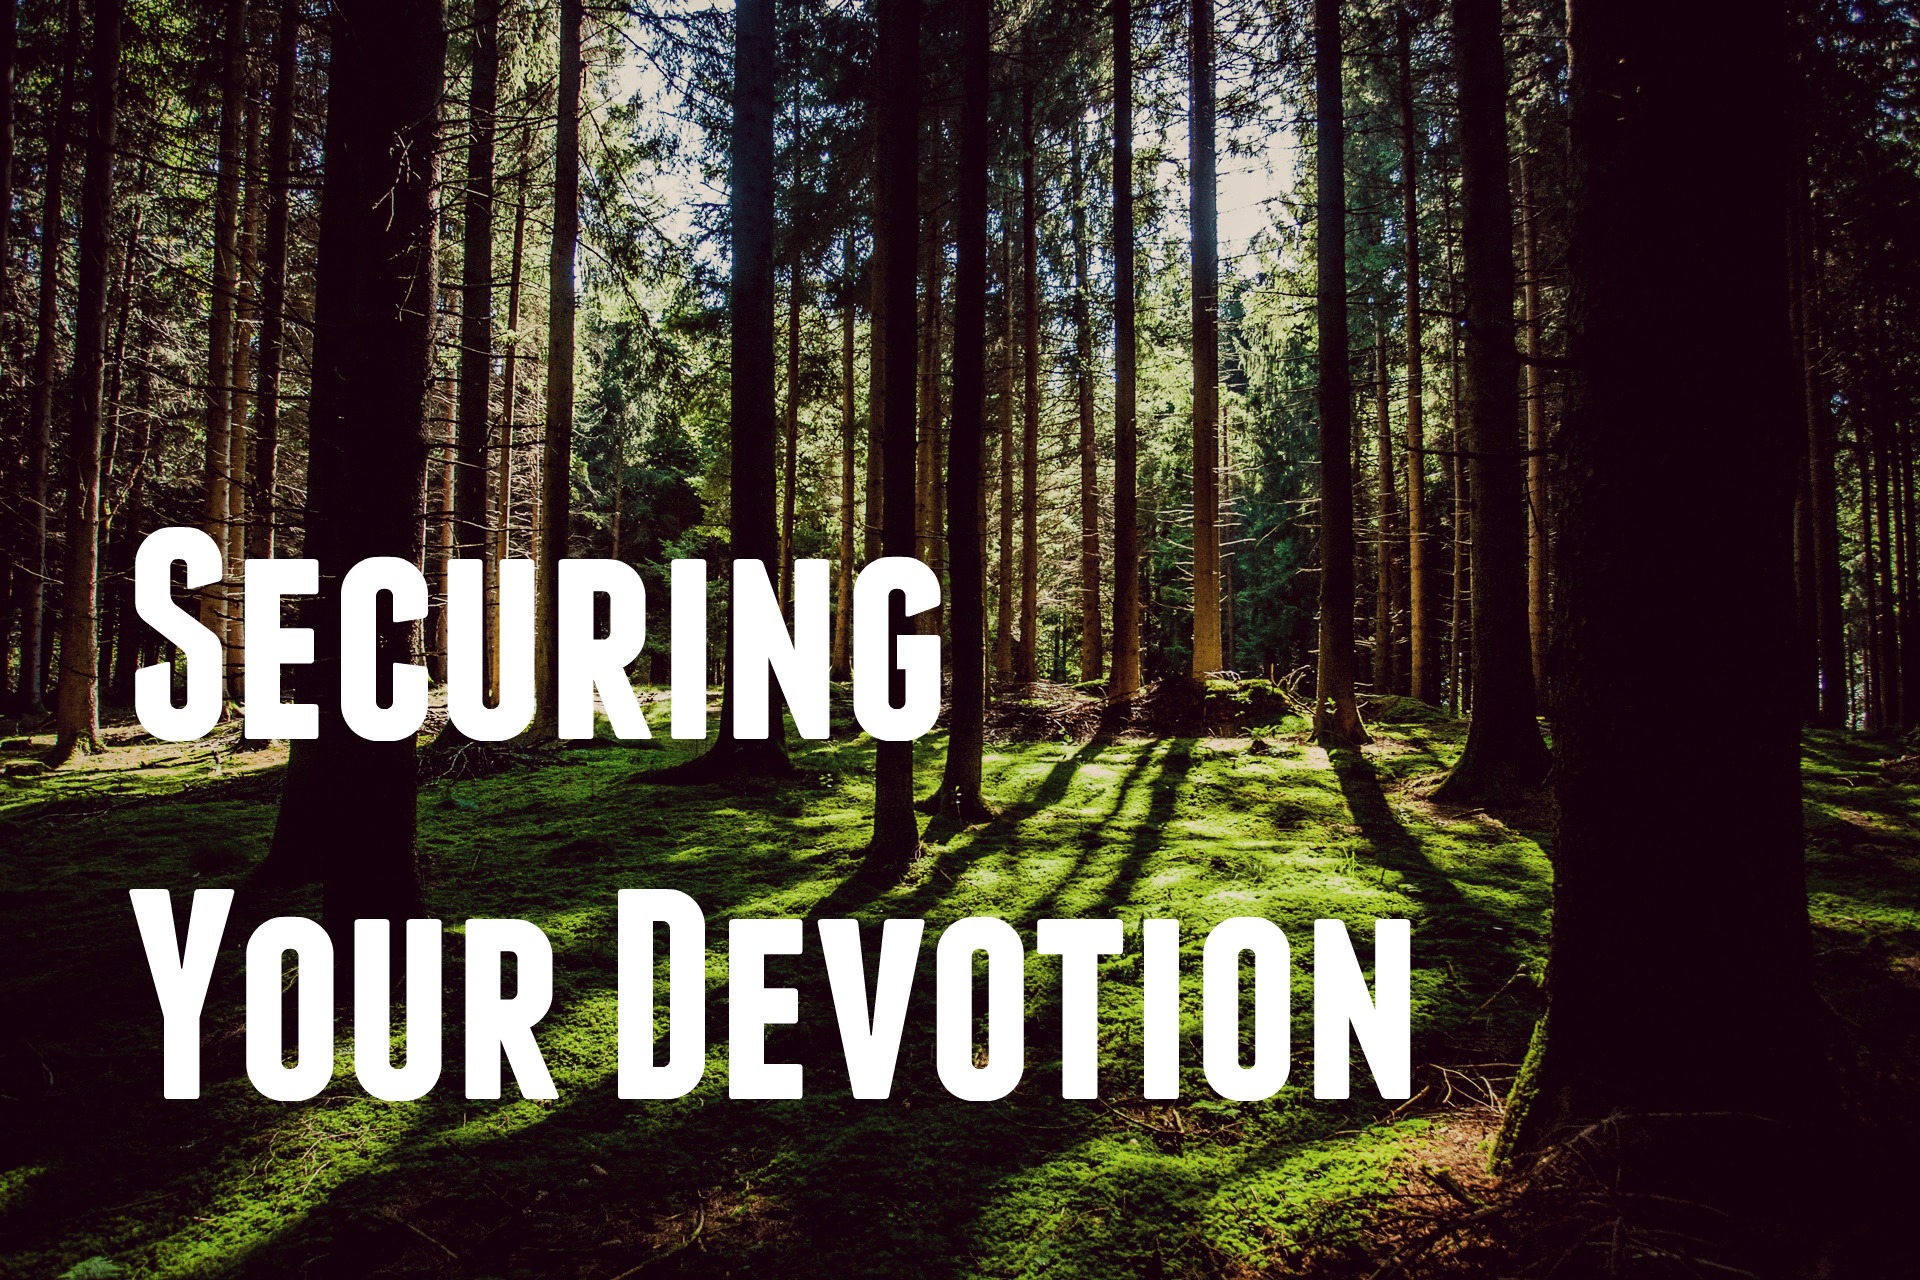 undistracted devotion to the lord